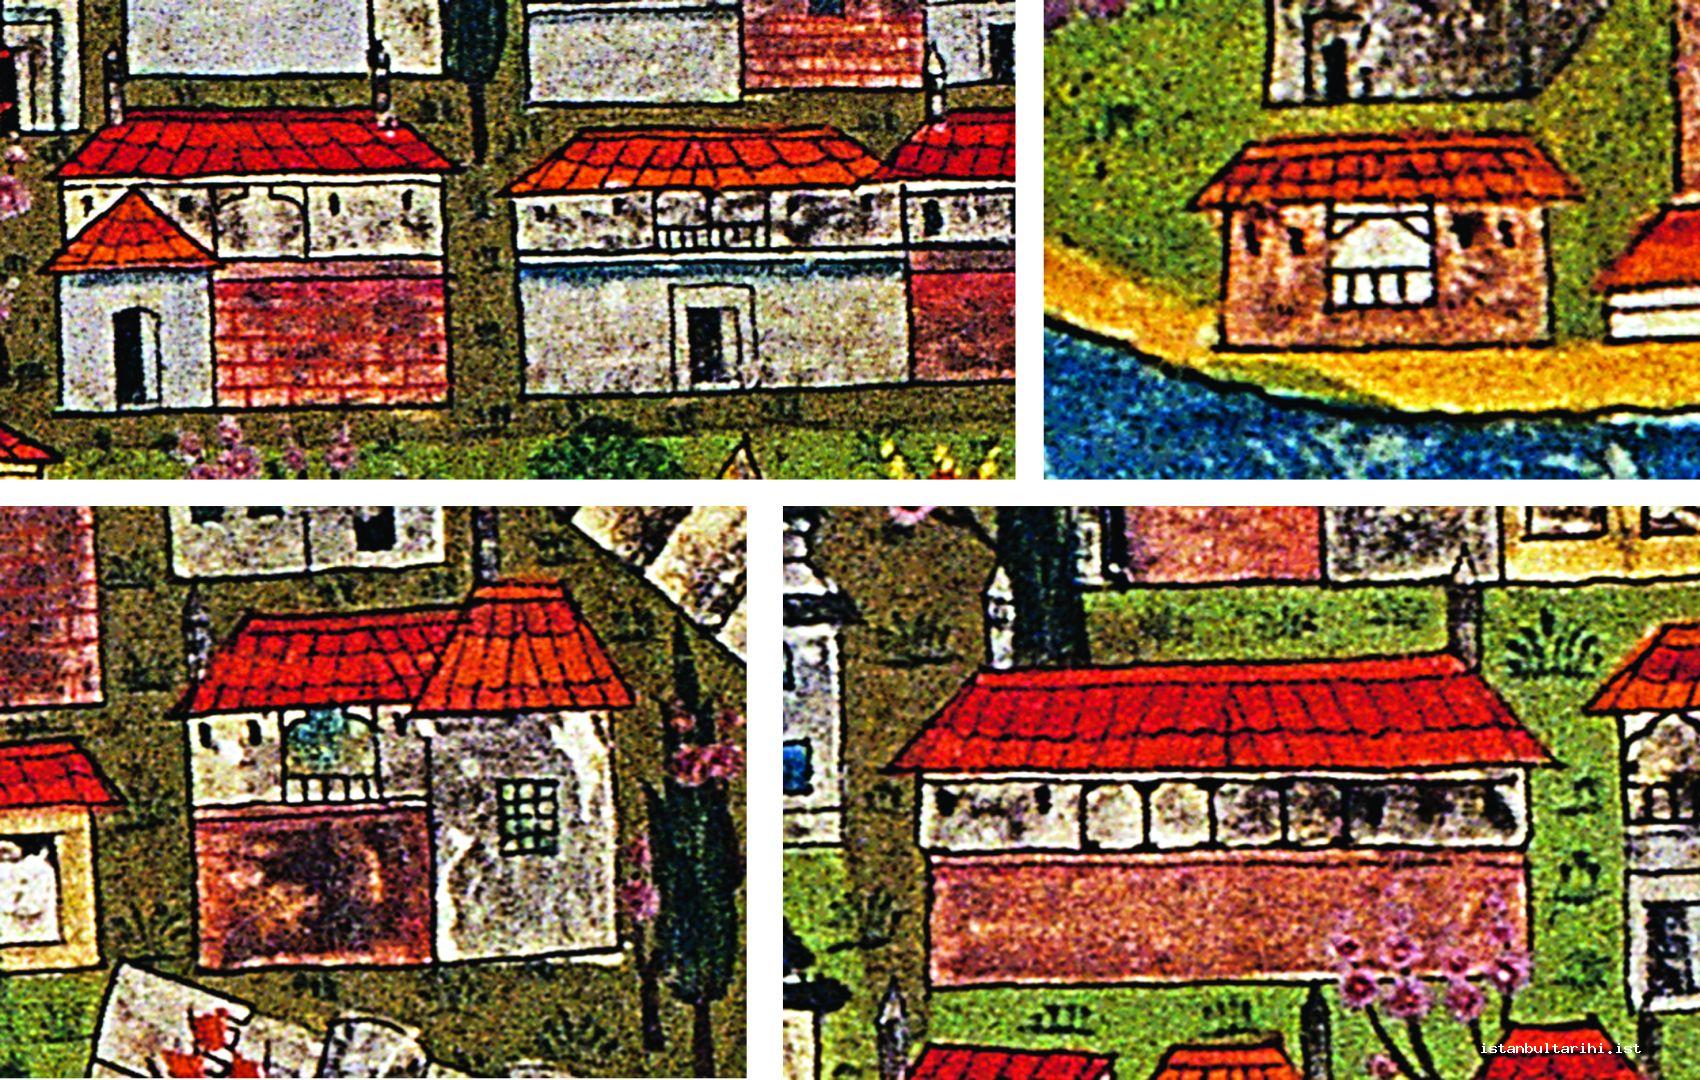 5- The houses with iwan seen in Matrakçı’s depiction of Istanbul    